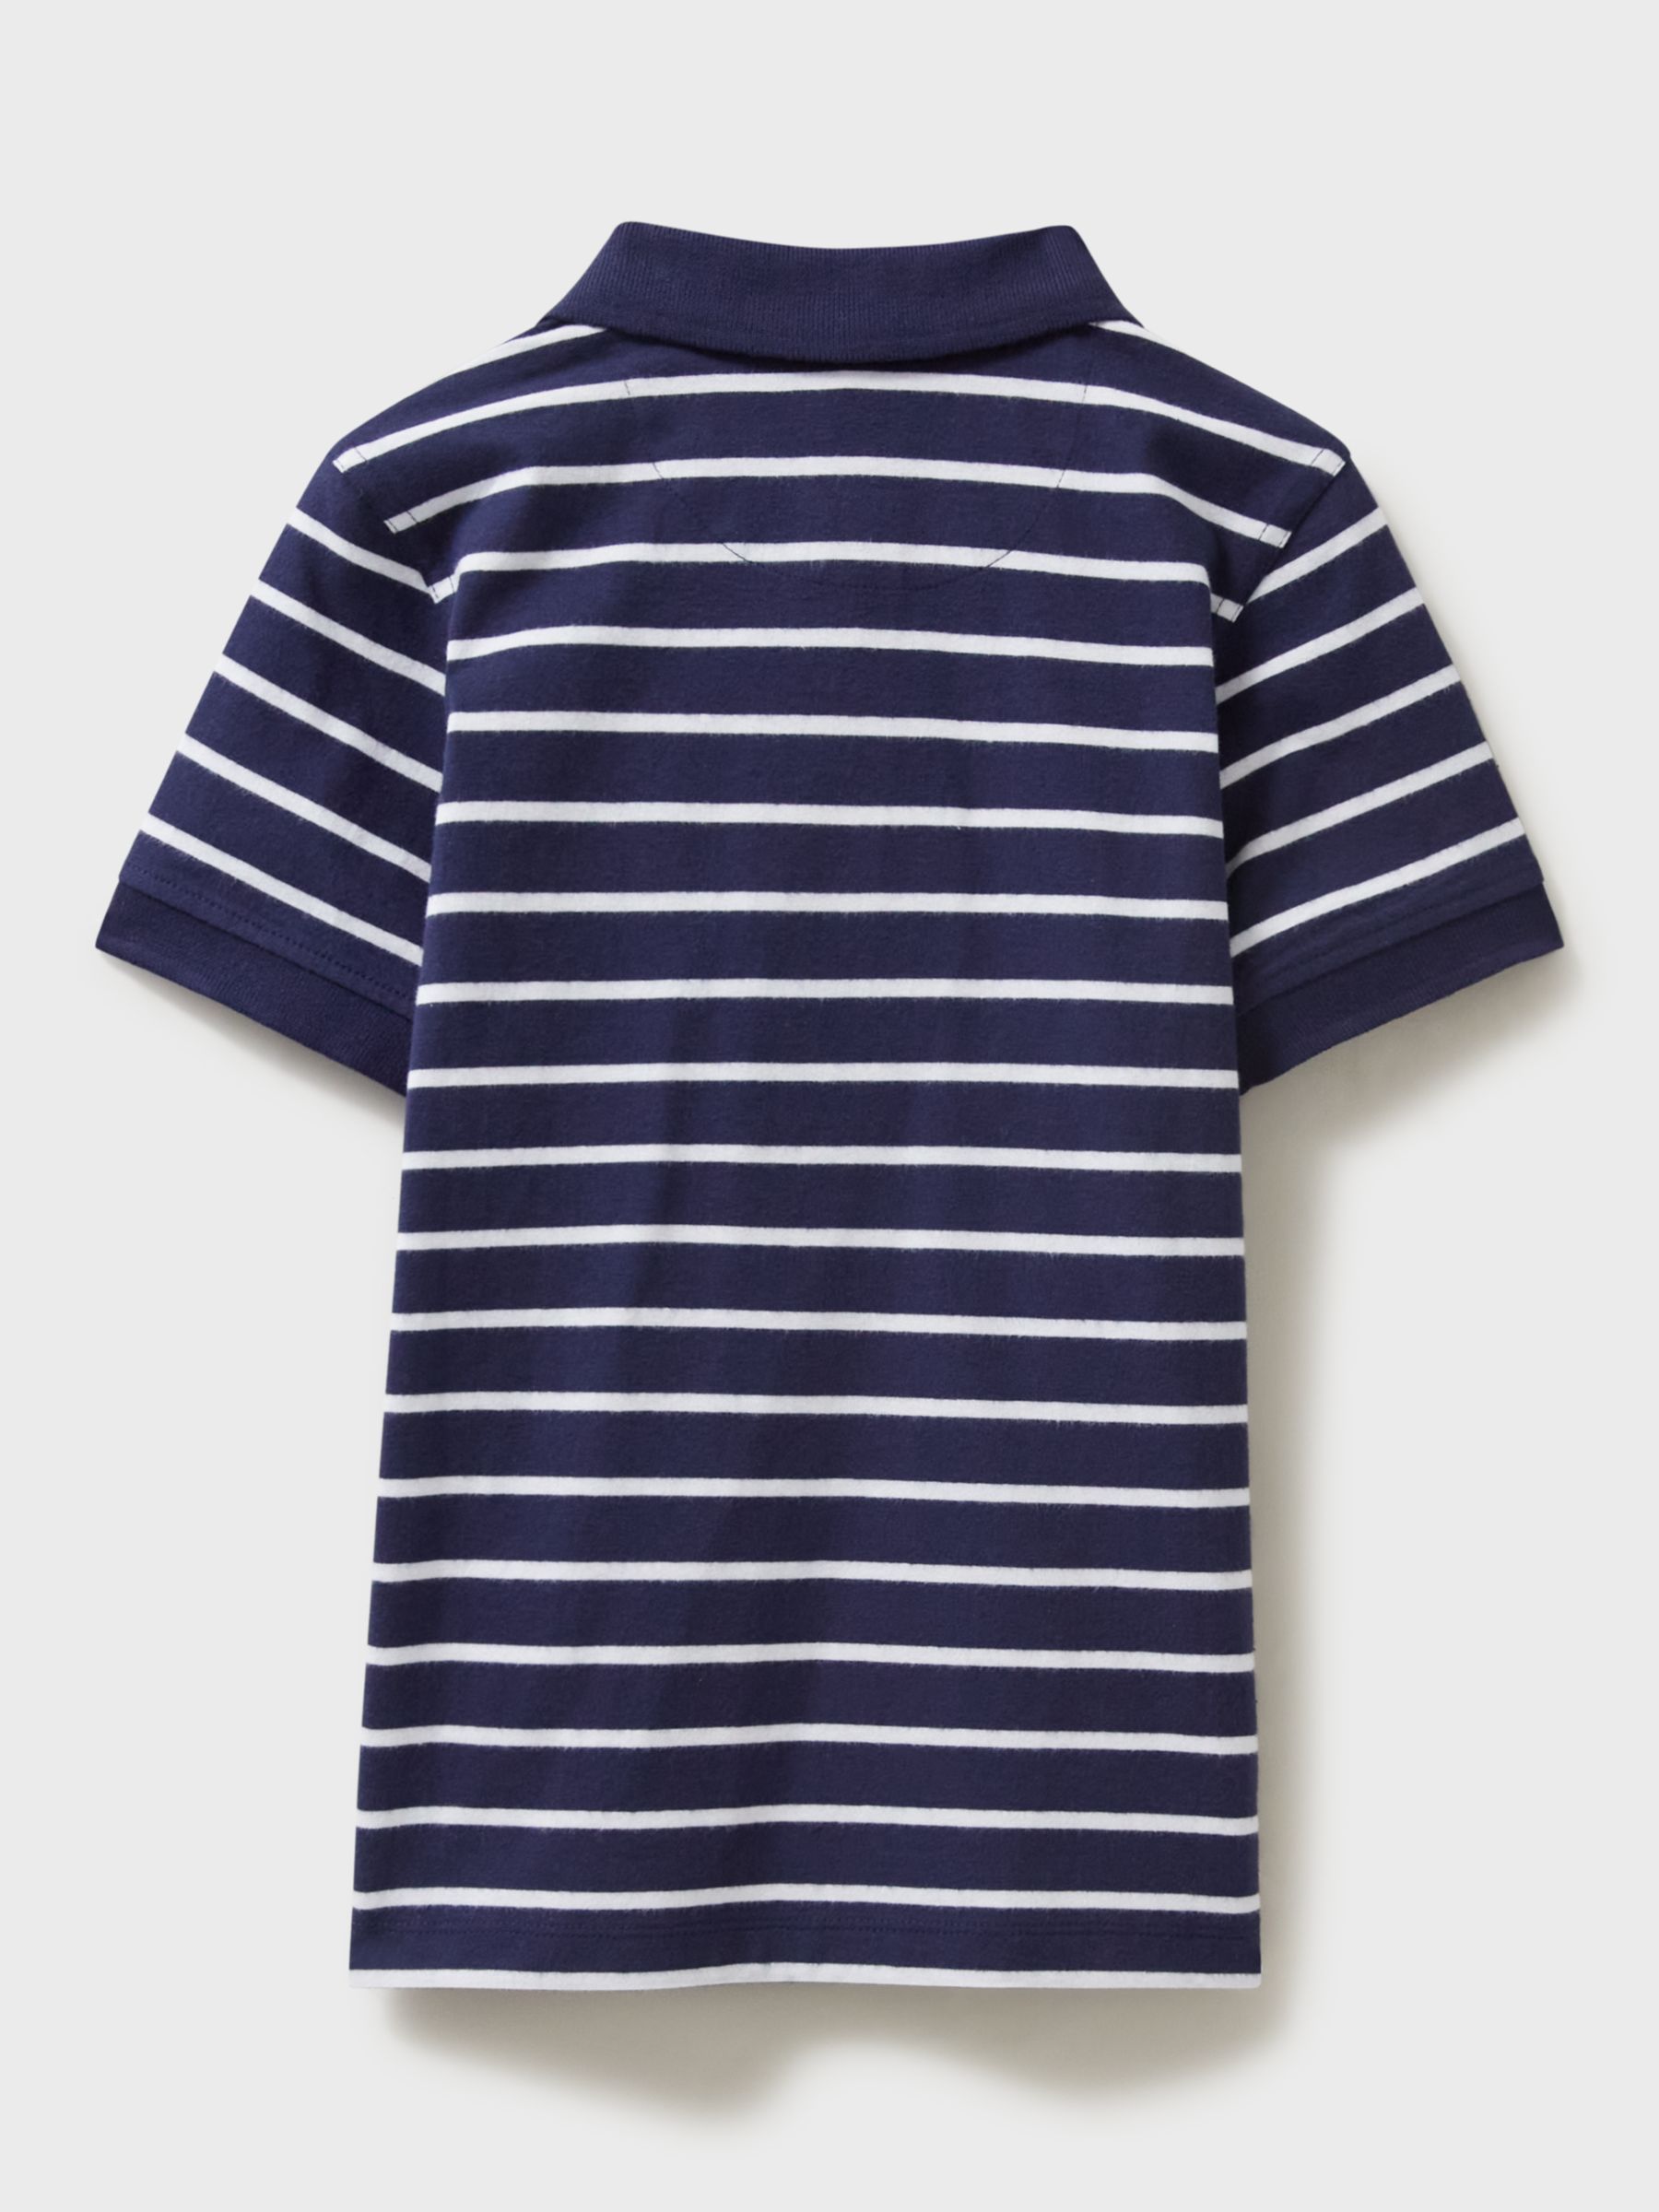 Crew Clothing Kids' Striped Pique Short Sleeved Polo Shirt, Navy/White, 11-12 years